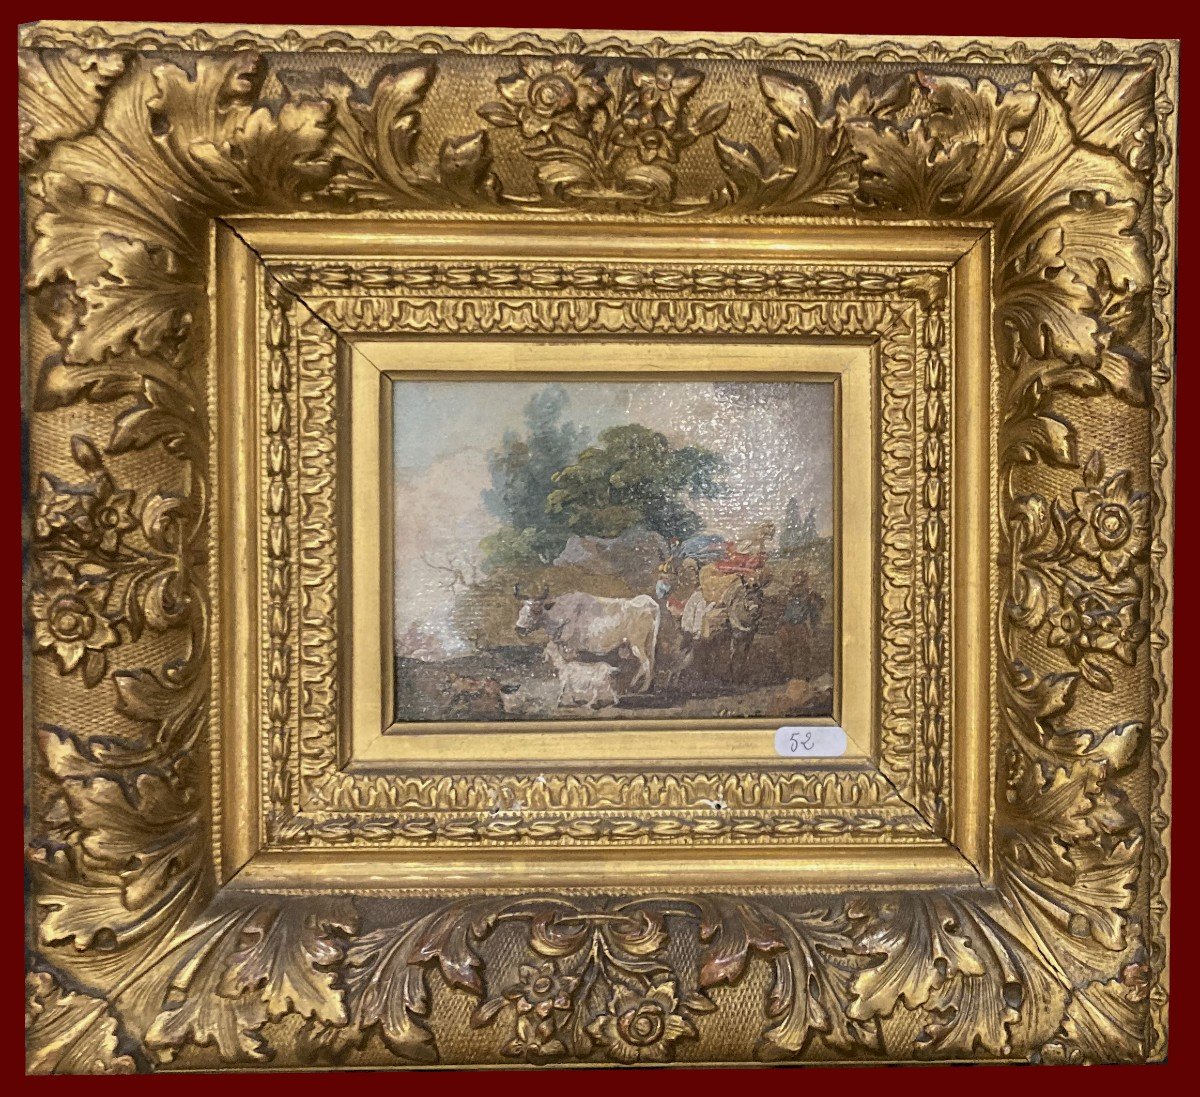 French School 18th "characters And Animals/characters And Architecture" Pair Of Oil Paintings